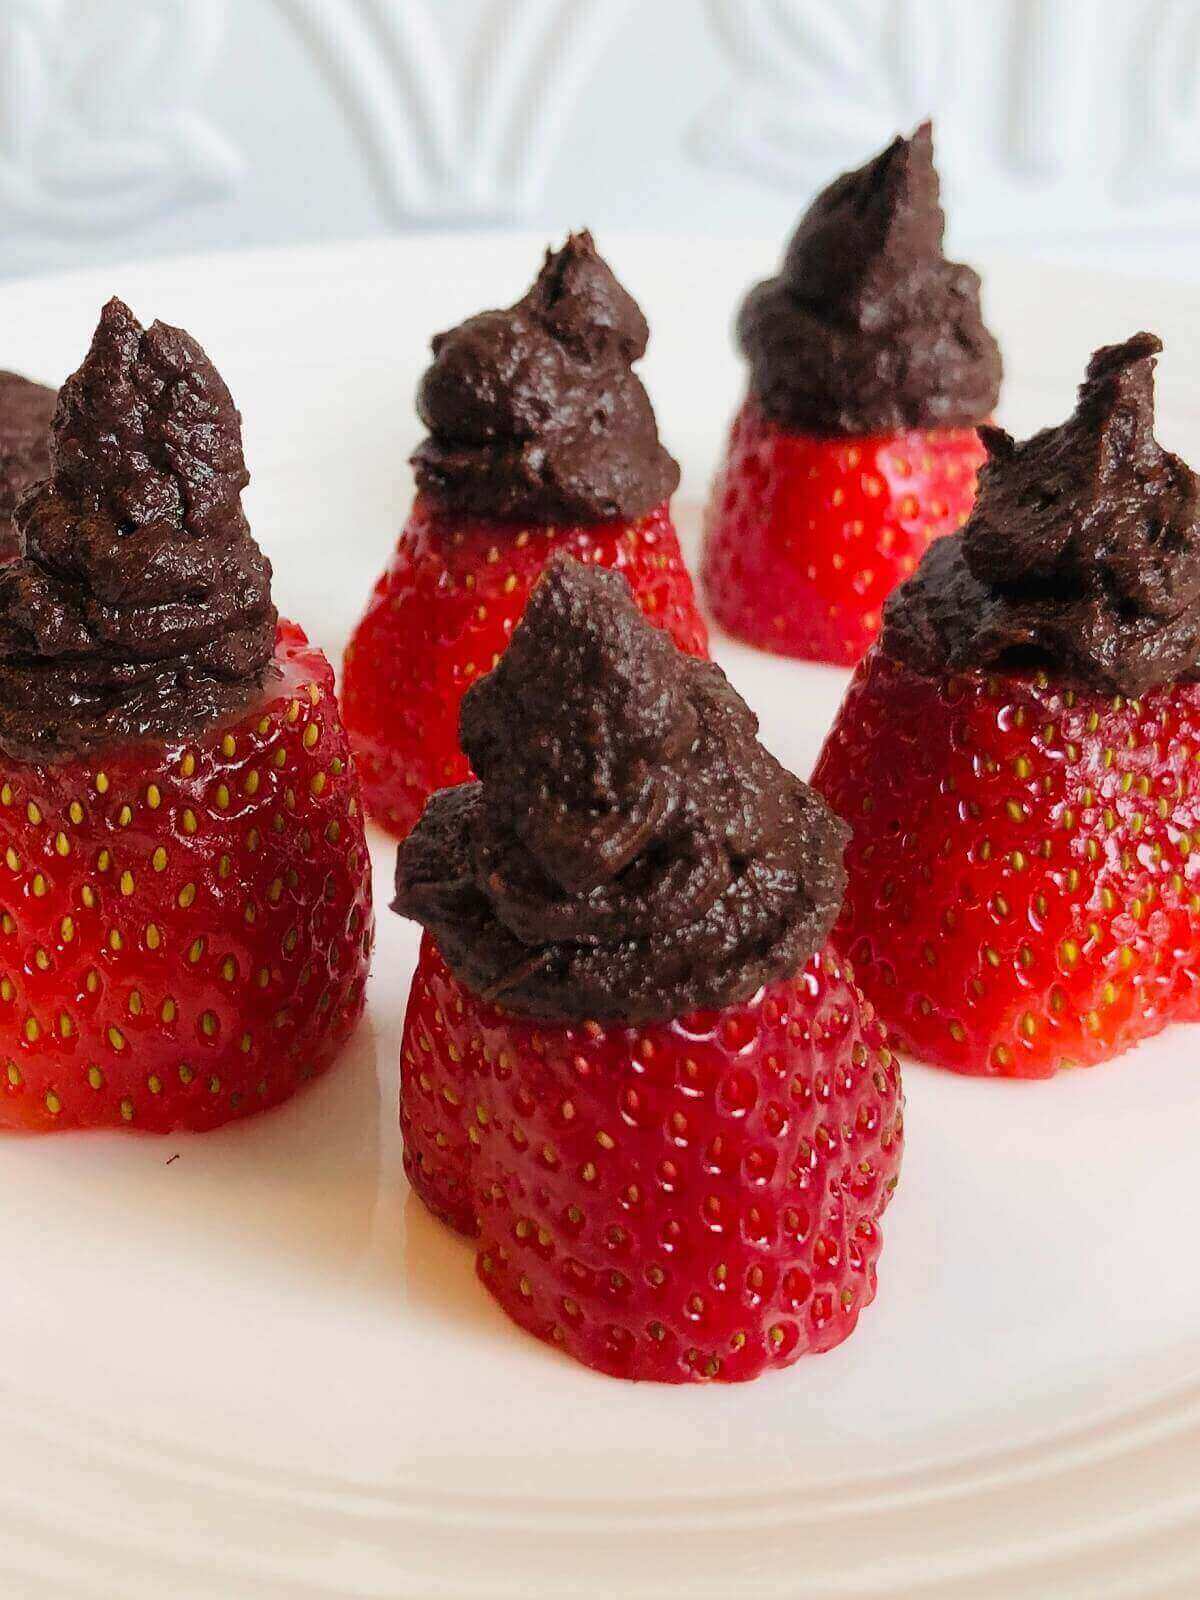 Strawberries stuffed with chocolate filling on a plate.